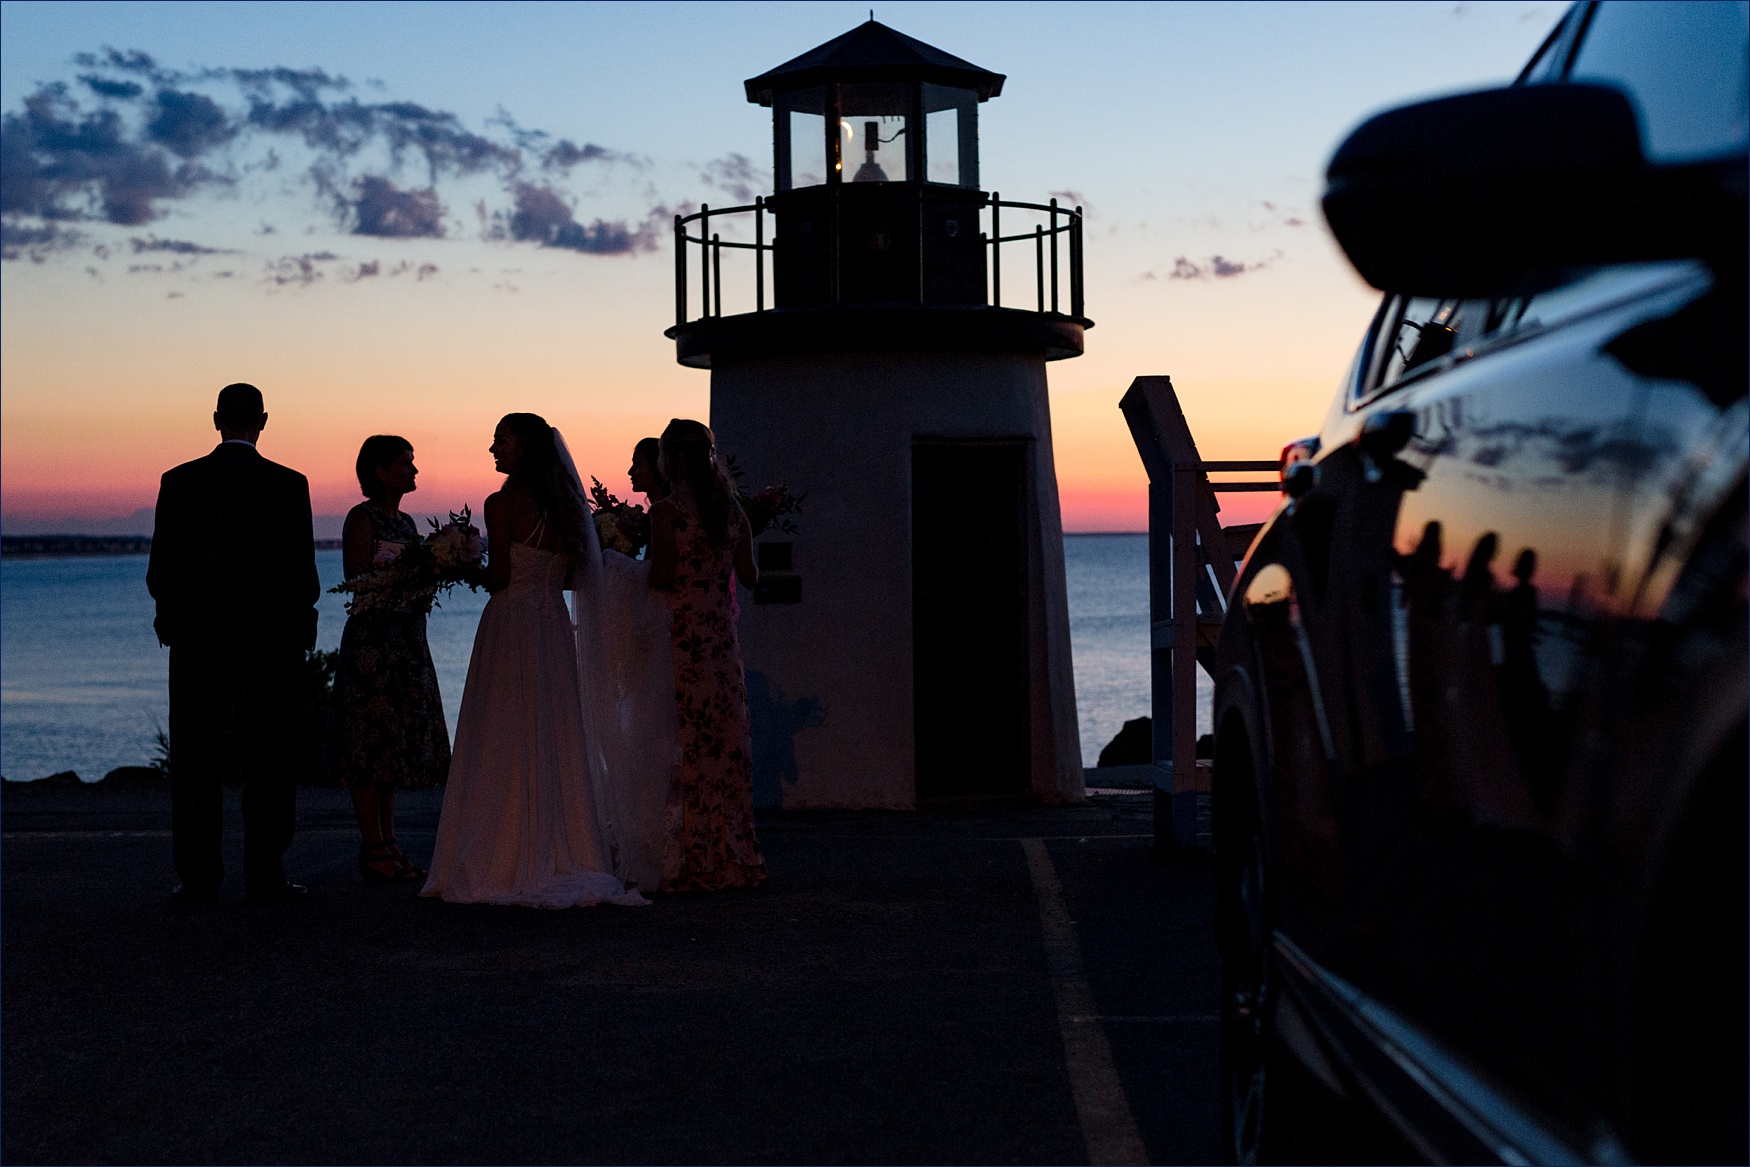 Ogunquit lighthouse at sunrise with the bride and her family